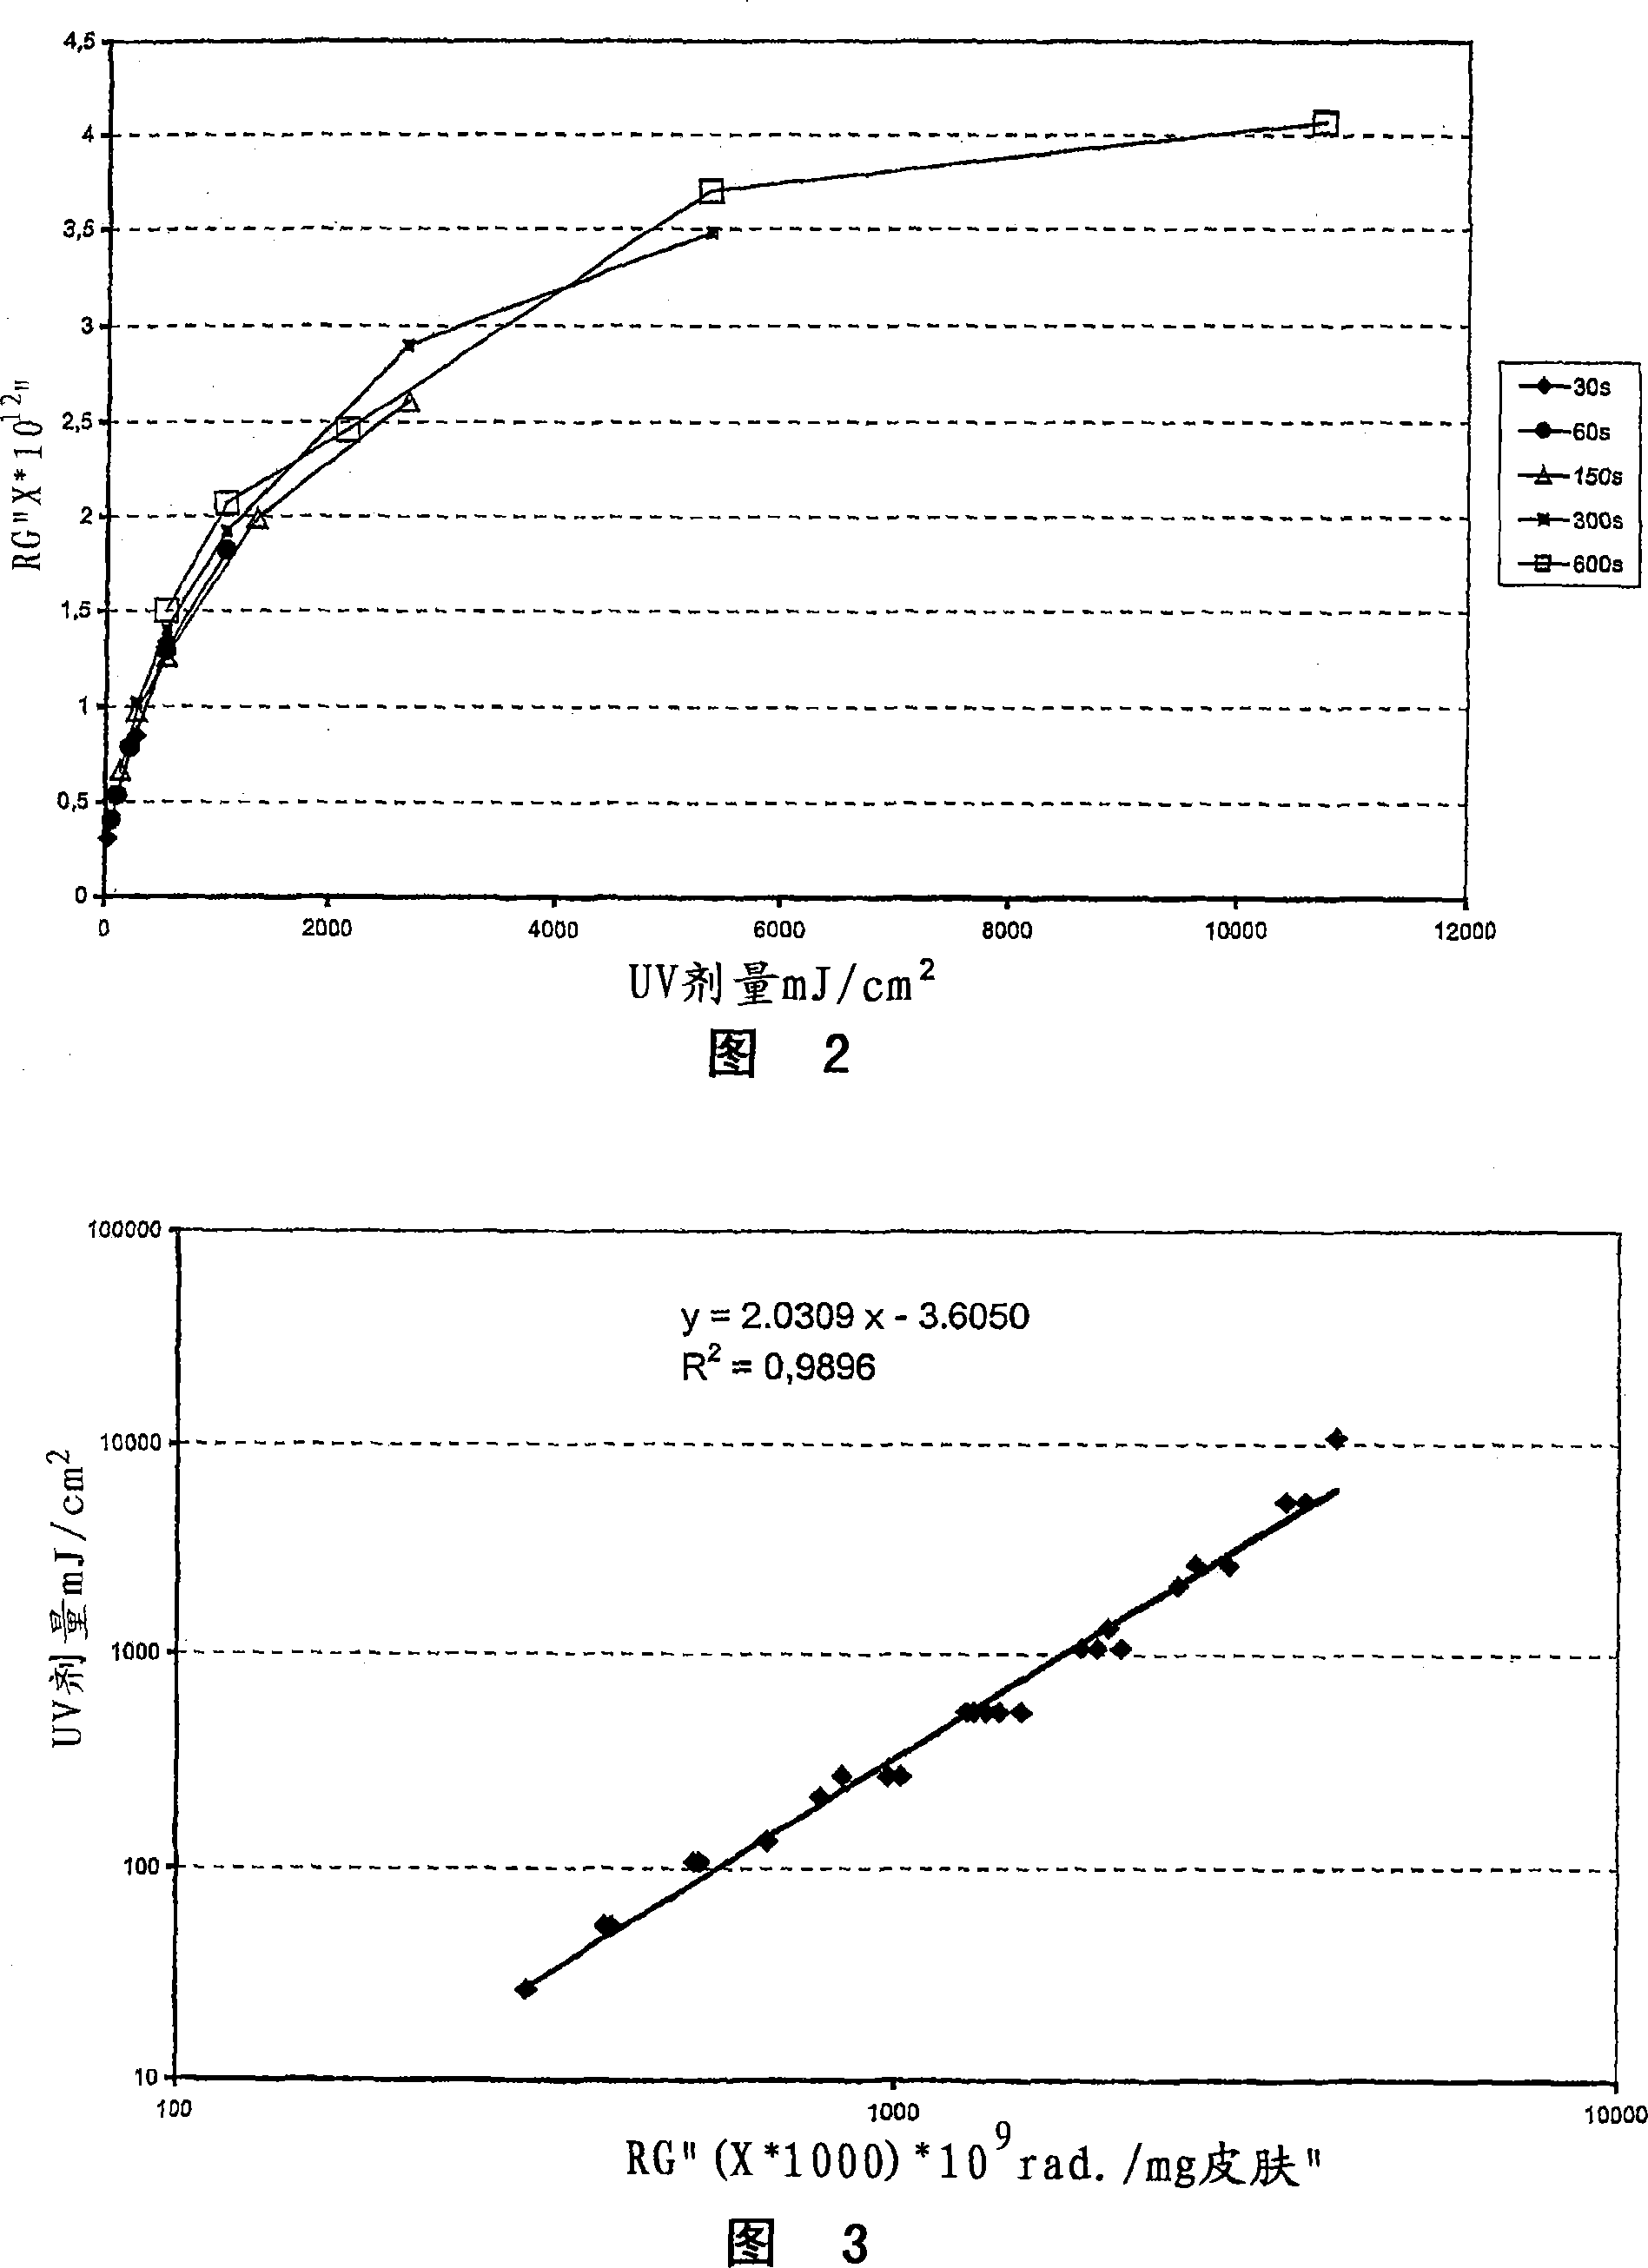 Method for determining an integral sun protection factor encompassing UVA and UVB radiation